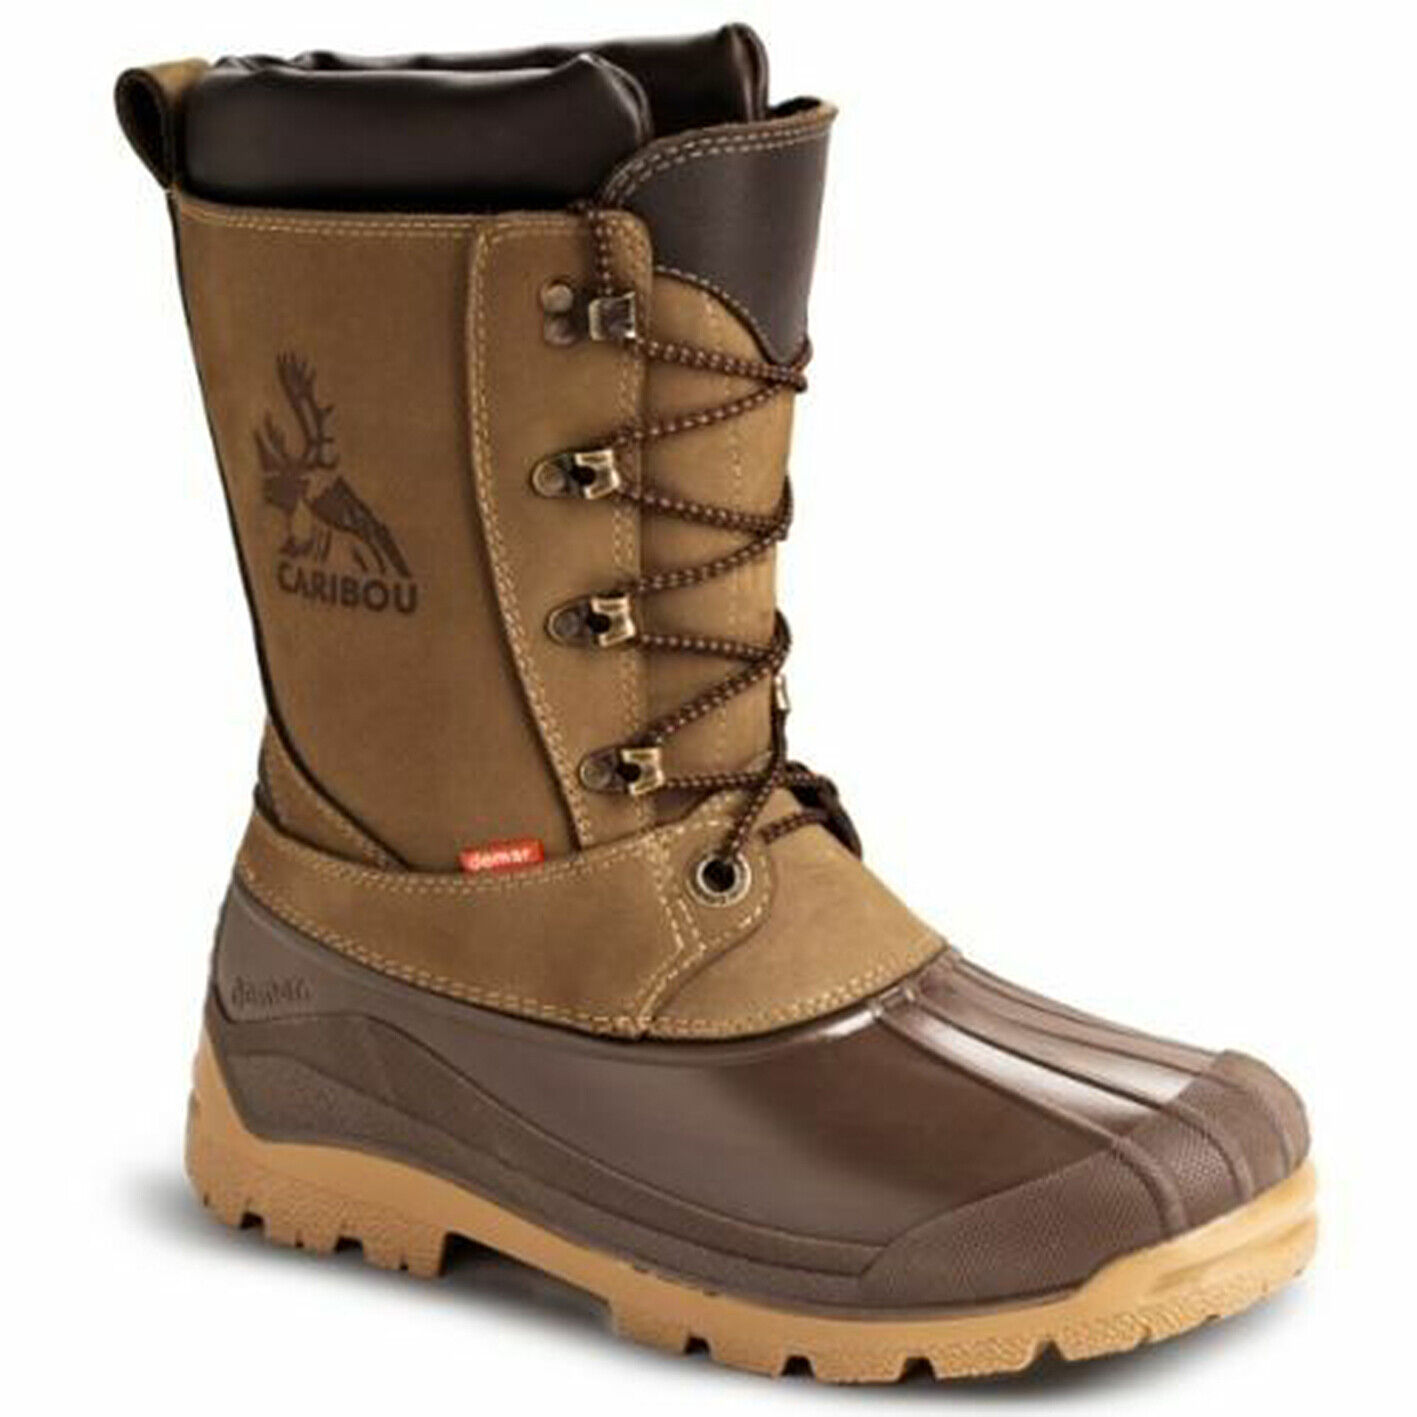 CARIBOU - Hunting Boots Shoes Snowboots Fishing Walking Voyager Outdoor Rain 